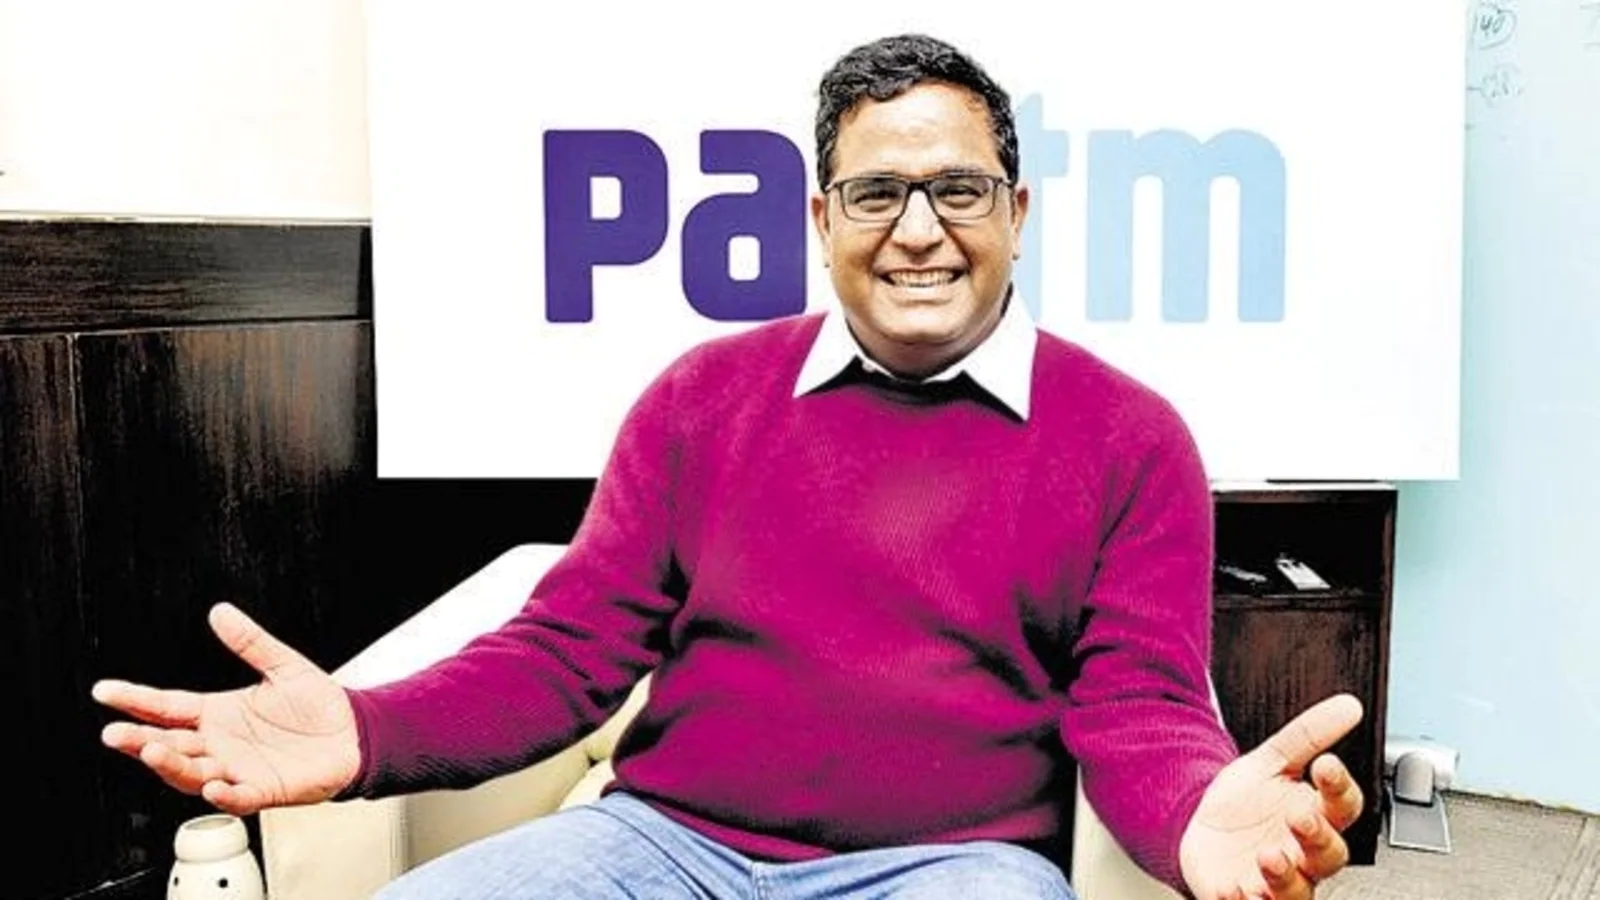 Paytm offers ‘work from home’ option in these roles, CEO Vijay Sharma tweets